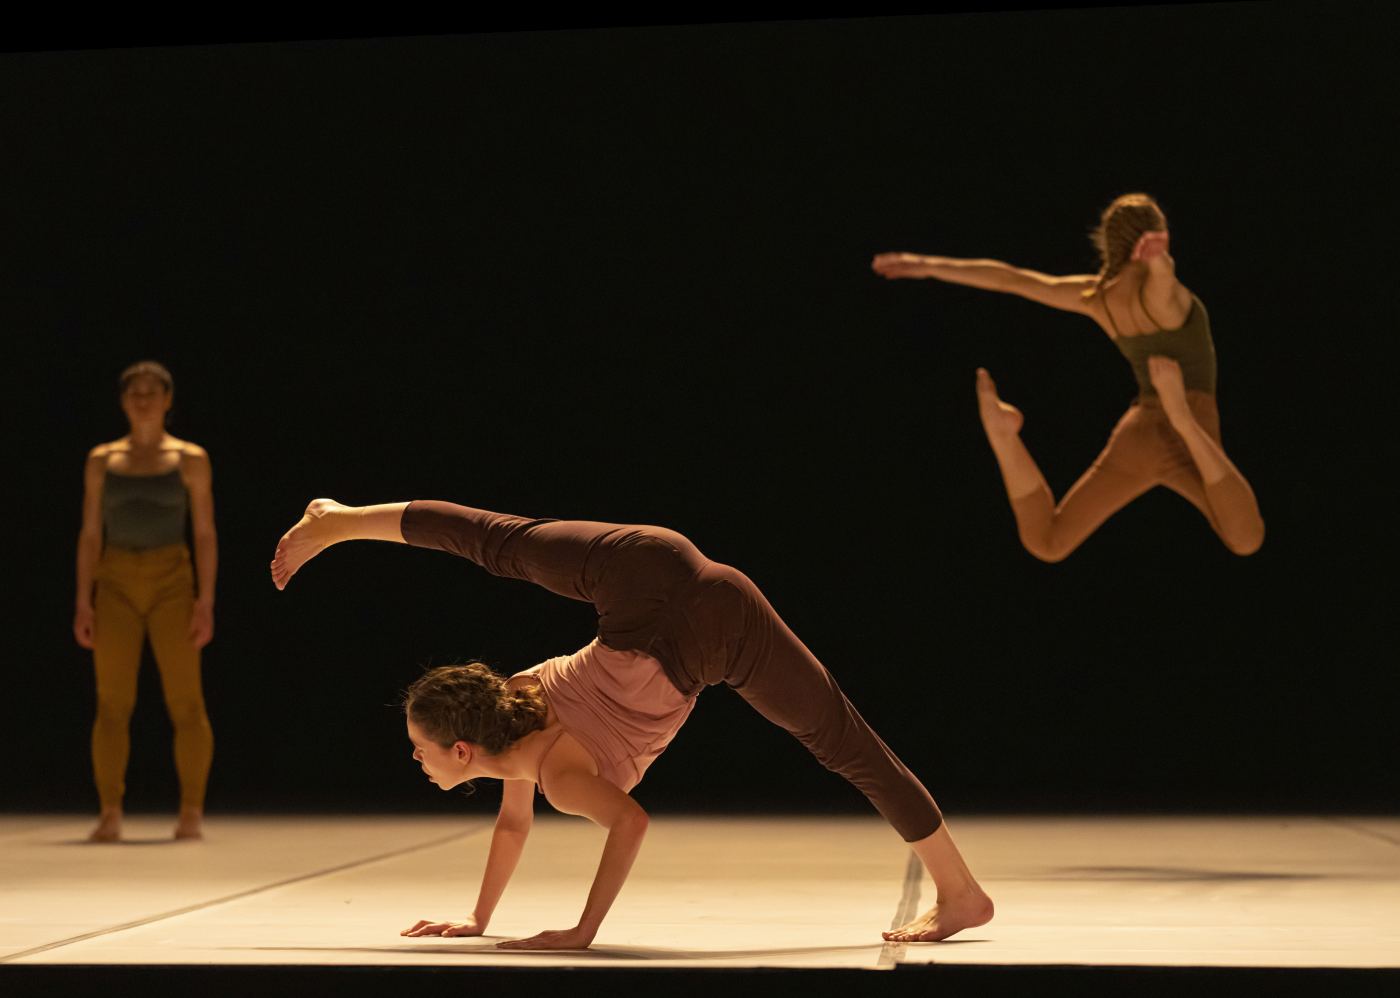 11. A.Tavares and ensemble, “Secus” by O.Naharin, Ballet of the State Theater Nuremberg 2022 © J.Vallinas